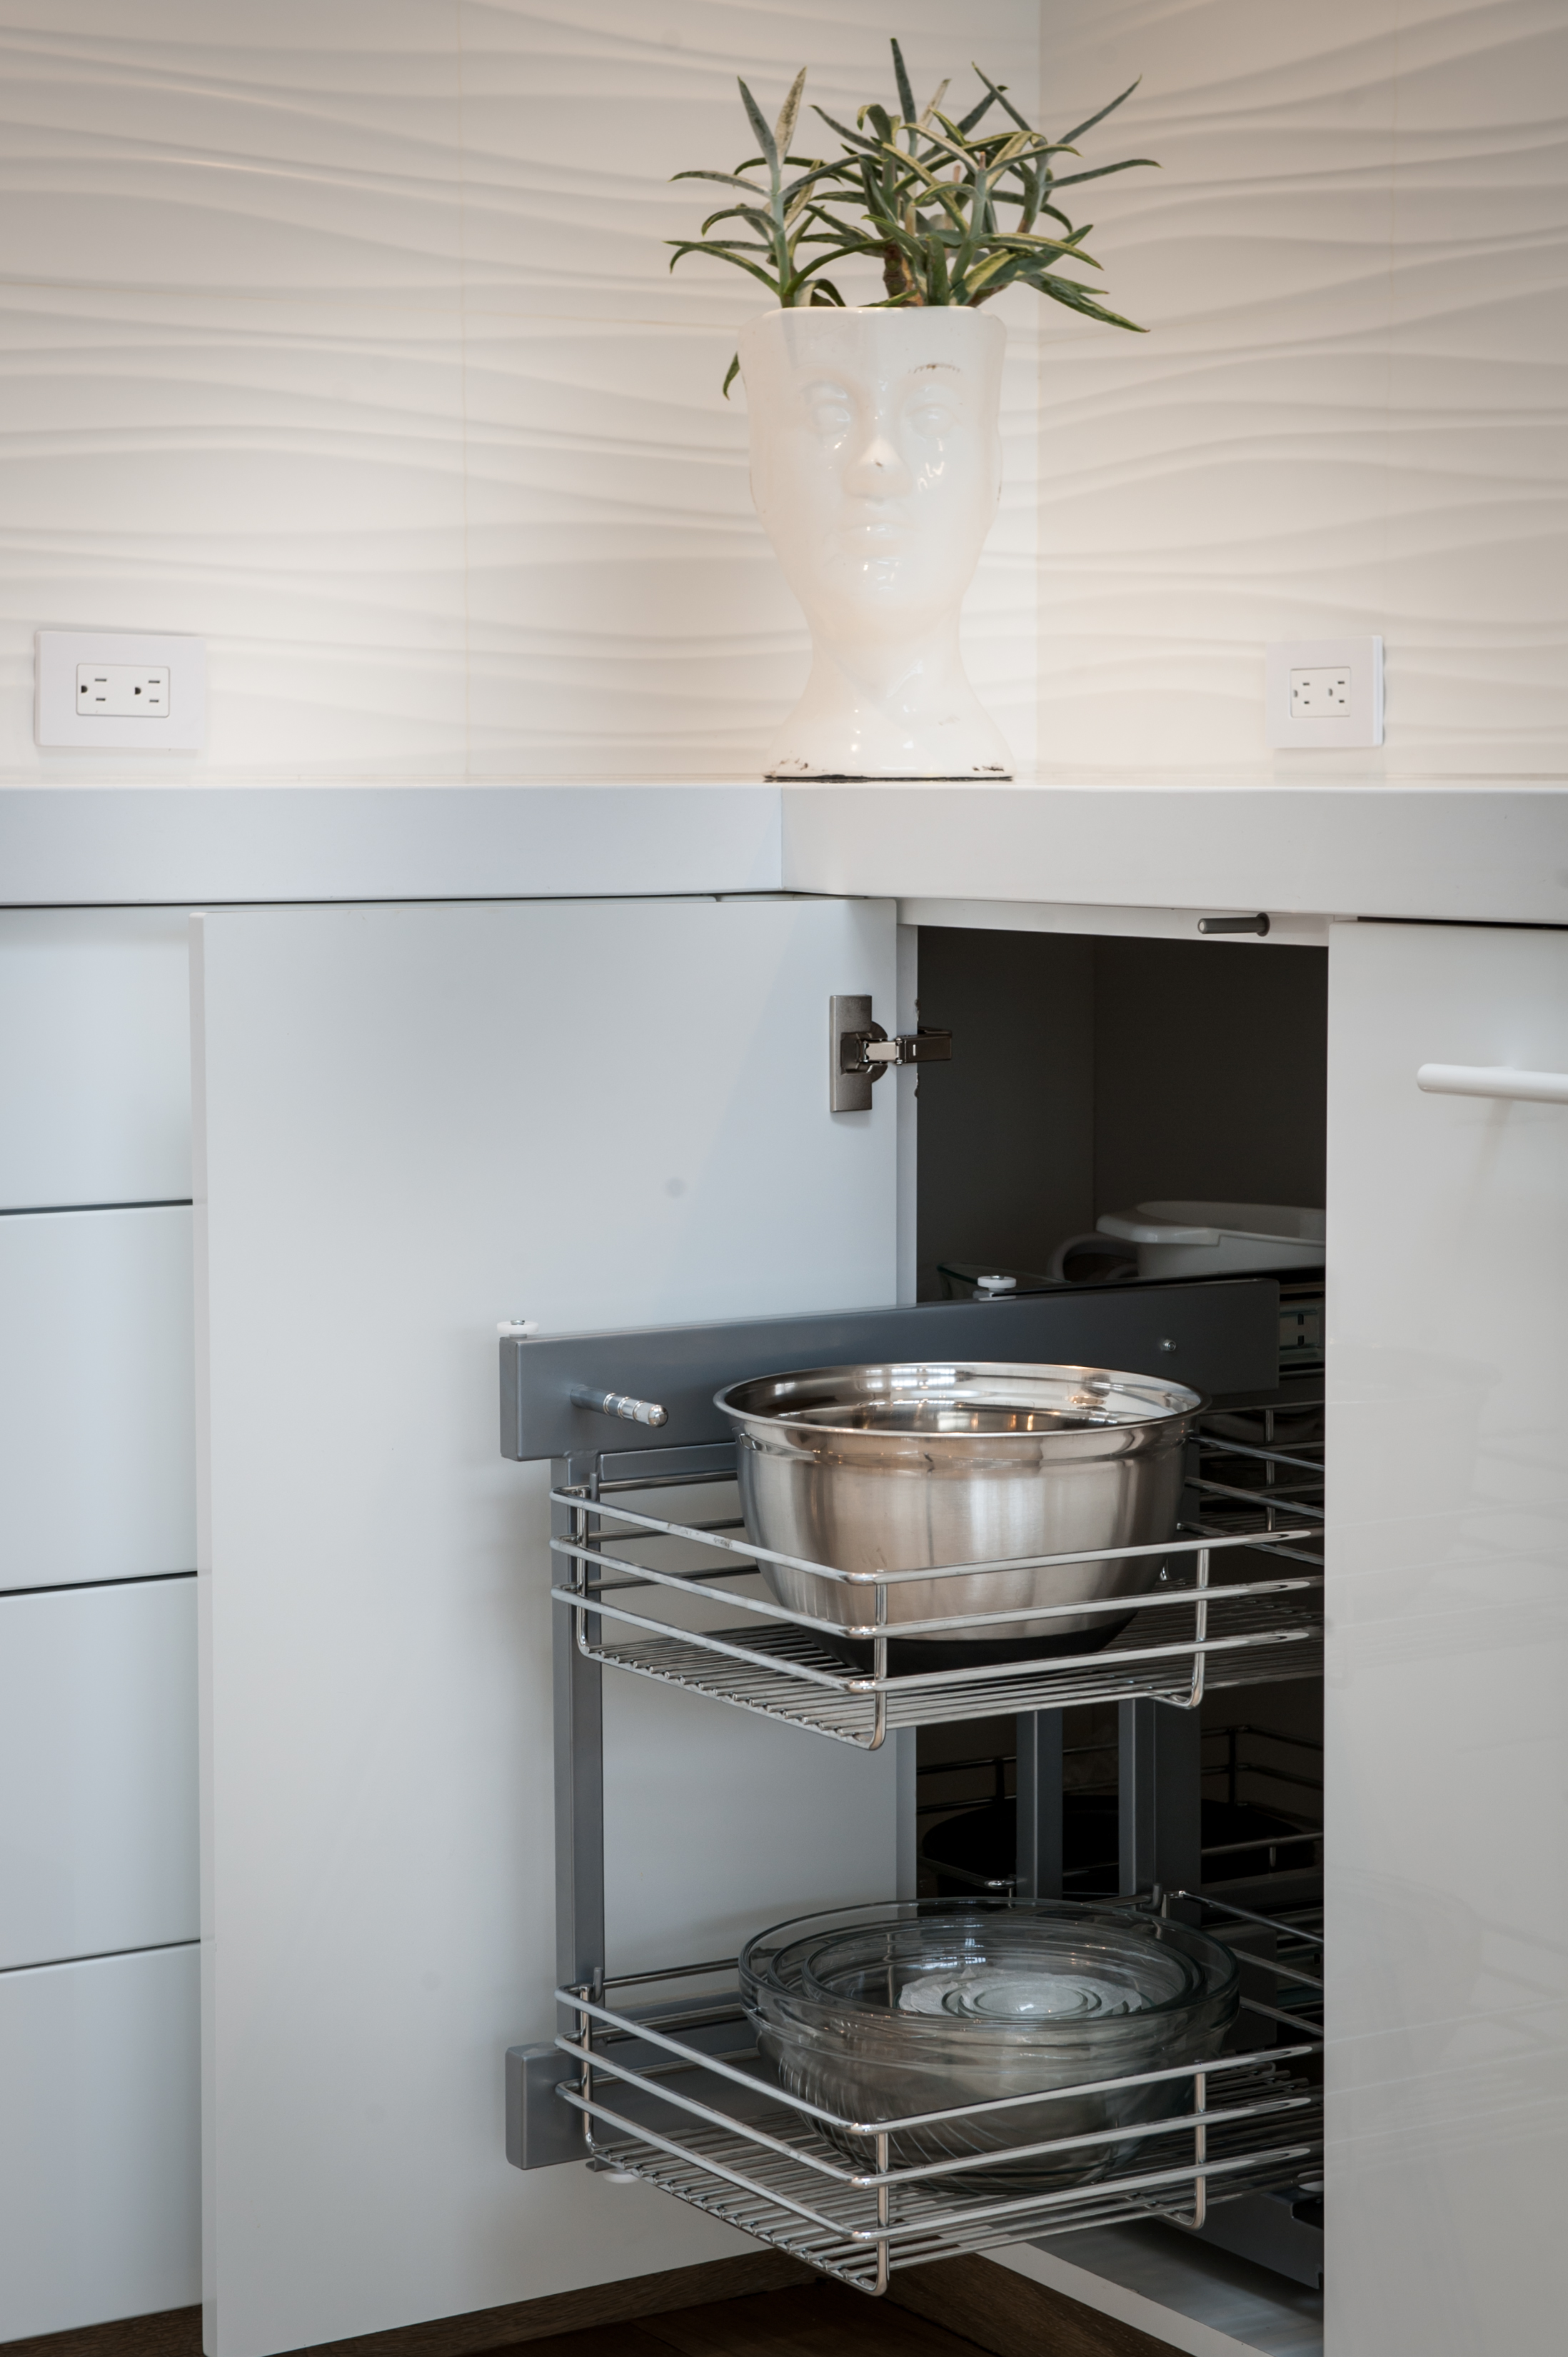 Narrow Pull Out Storage - Crystal Cabinets